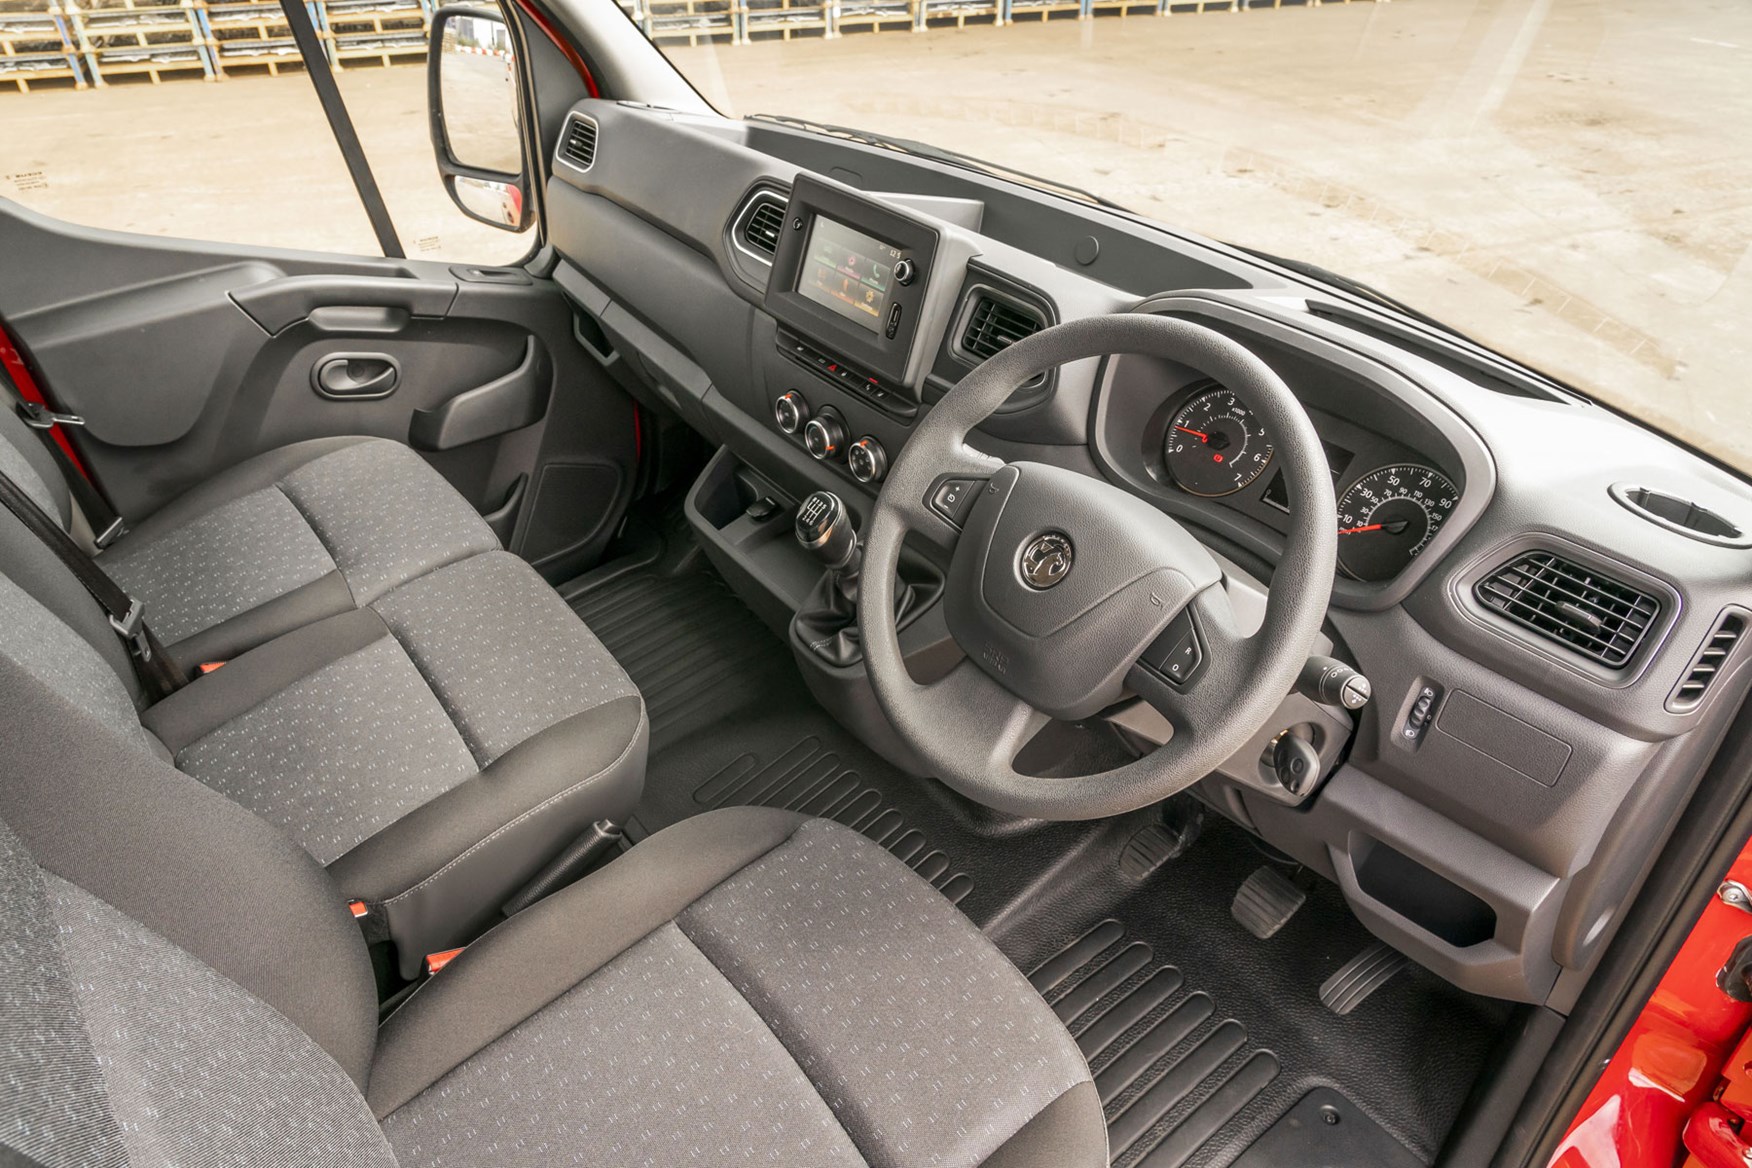 Vauxhall Movano review - 2020 model year, cab interior, 2019